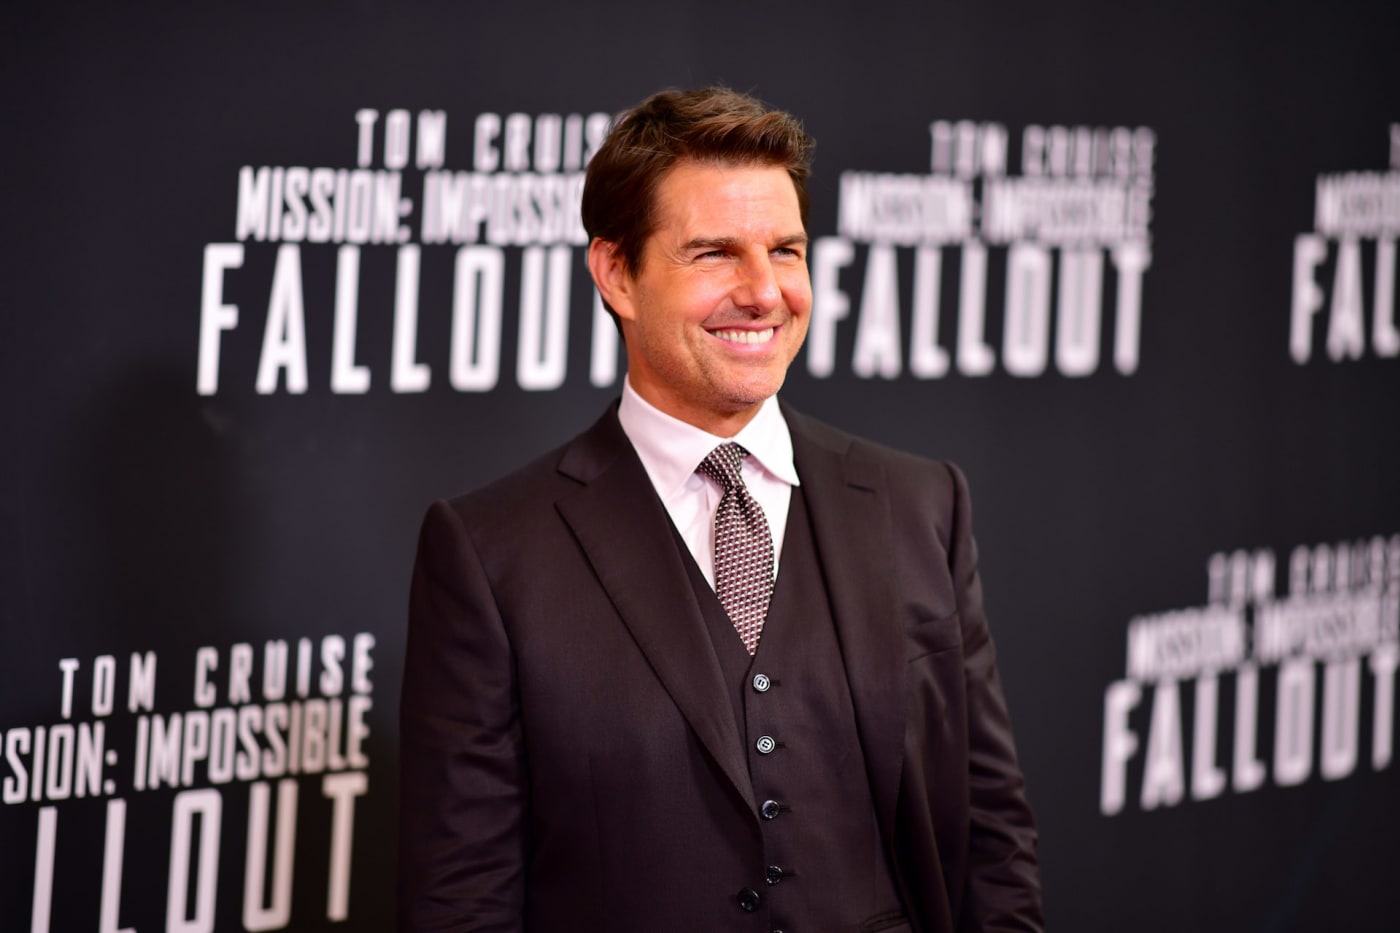 Tom Cruise attends the 'Mission: Impossible   Fallout' U.S. Premiere.